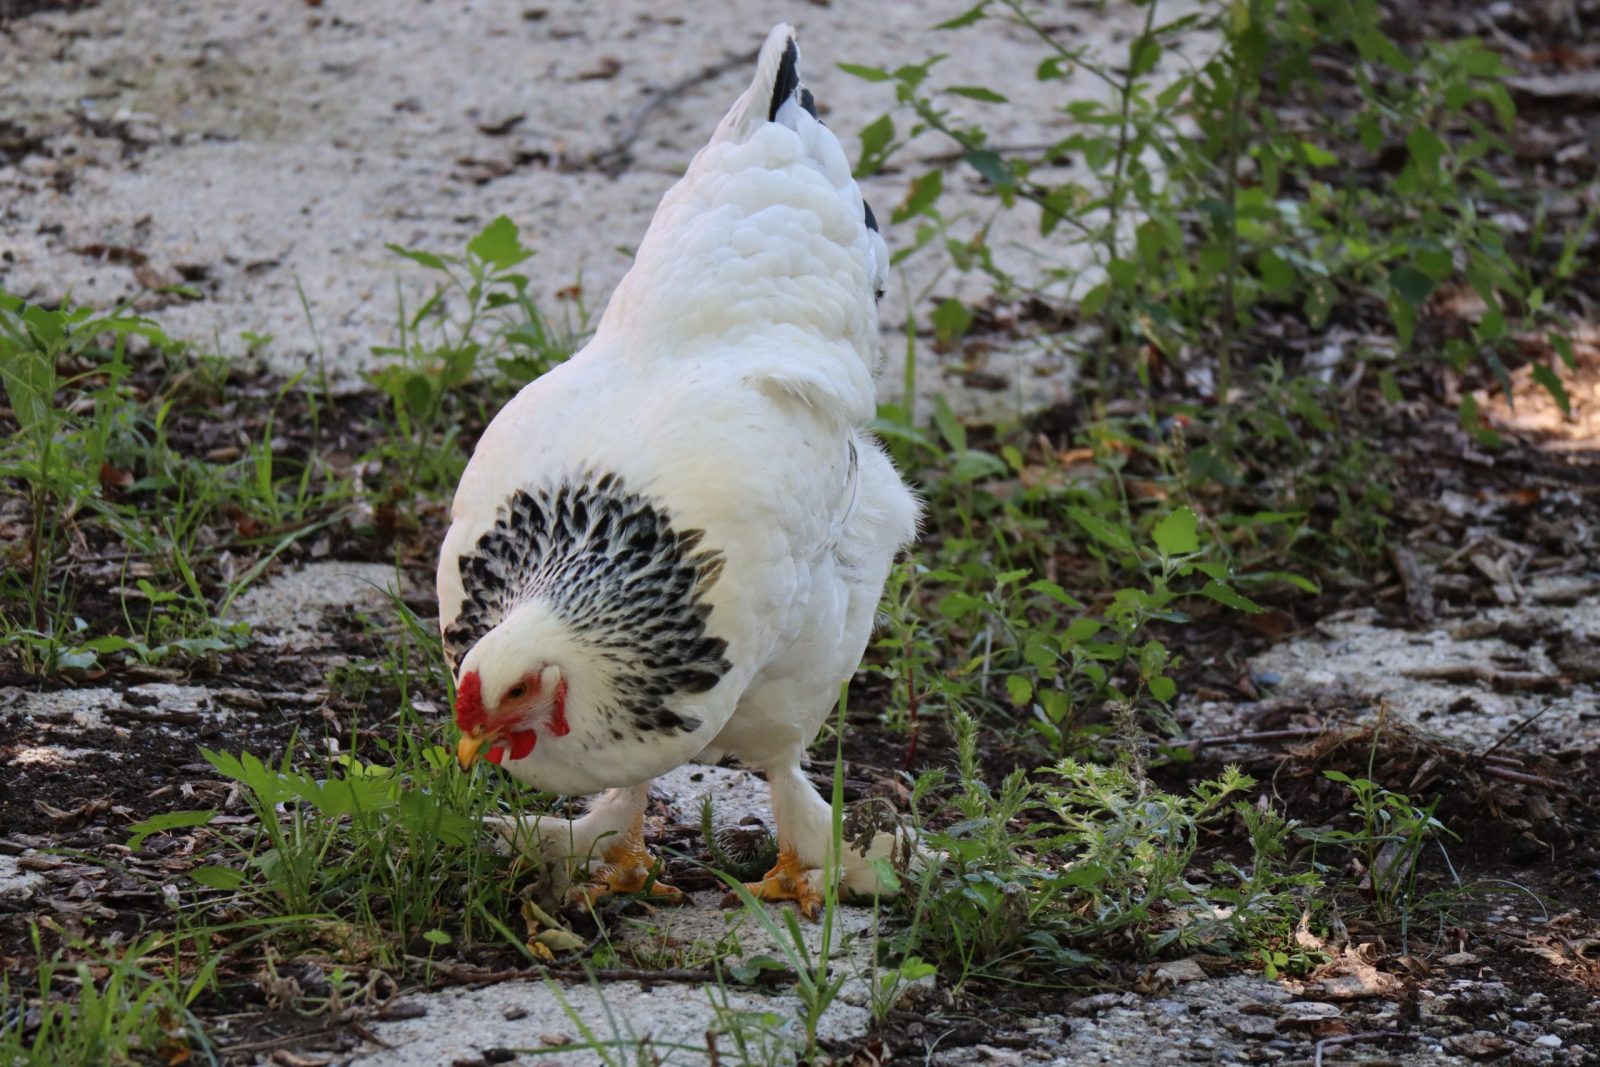 Brahmas are one of the largest chickens